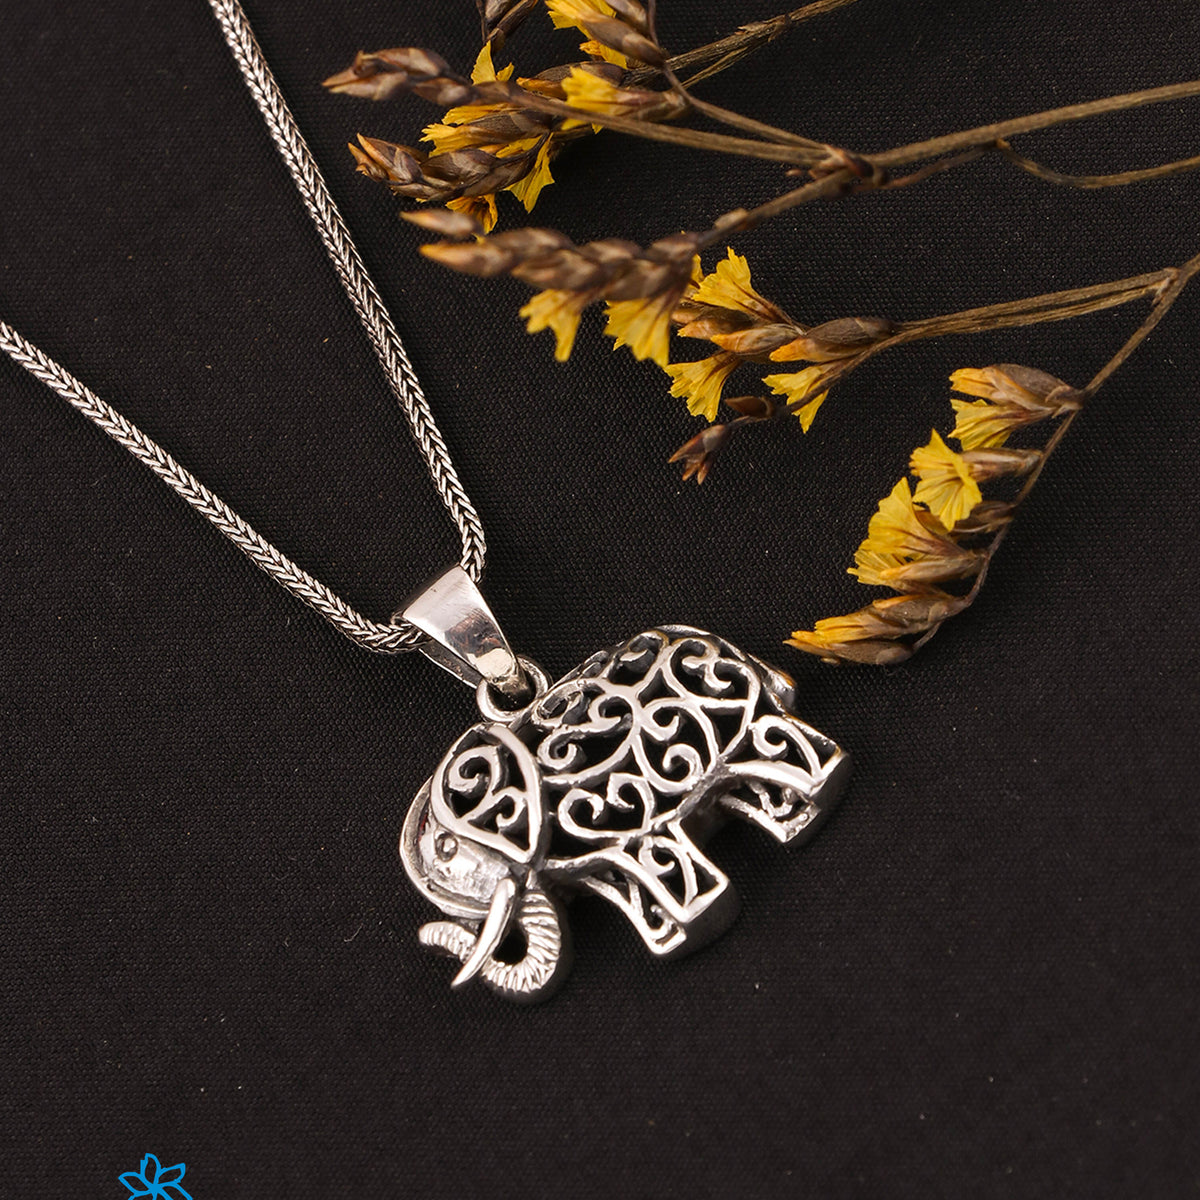 925 SILVER PAVE ELEPHANT NECKLACE | Patty Q's Jewelry Inc